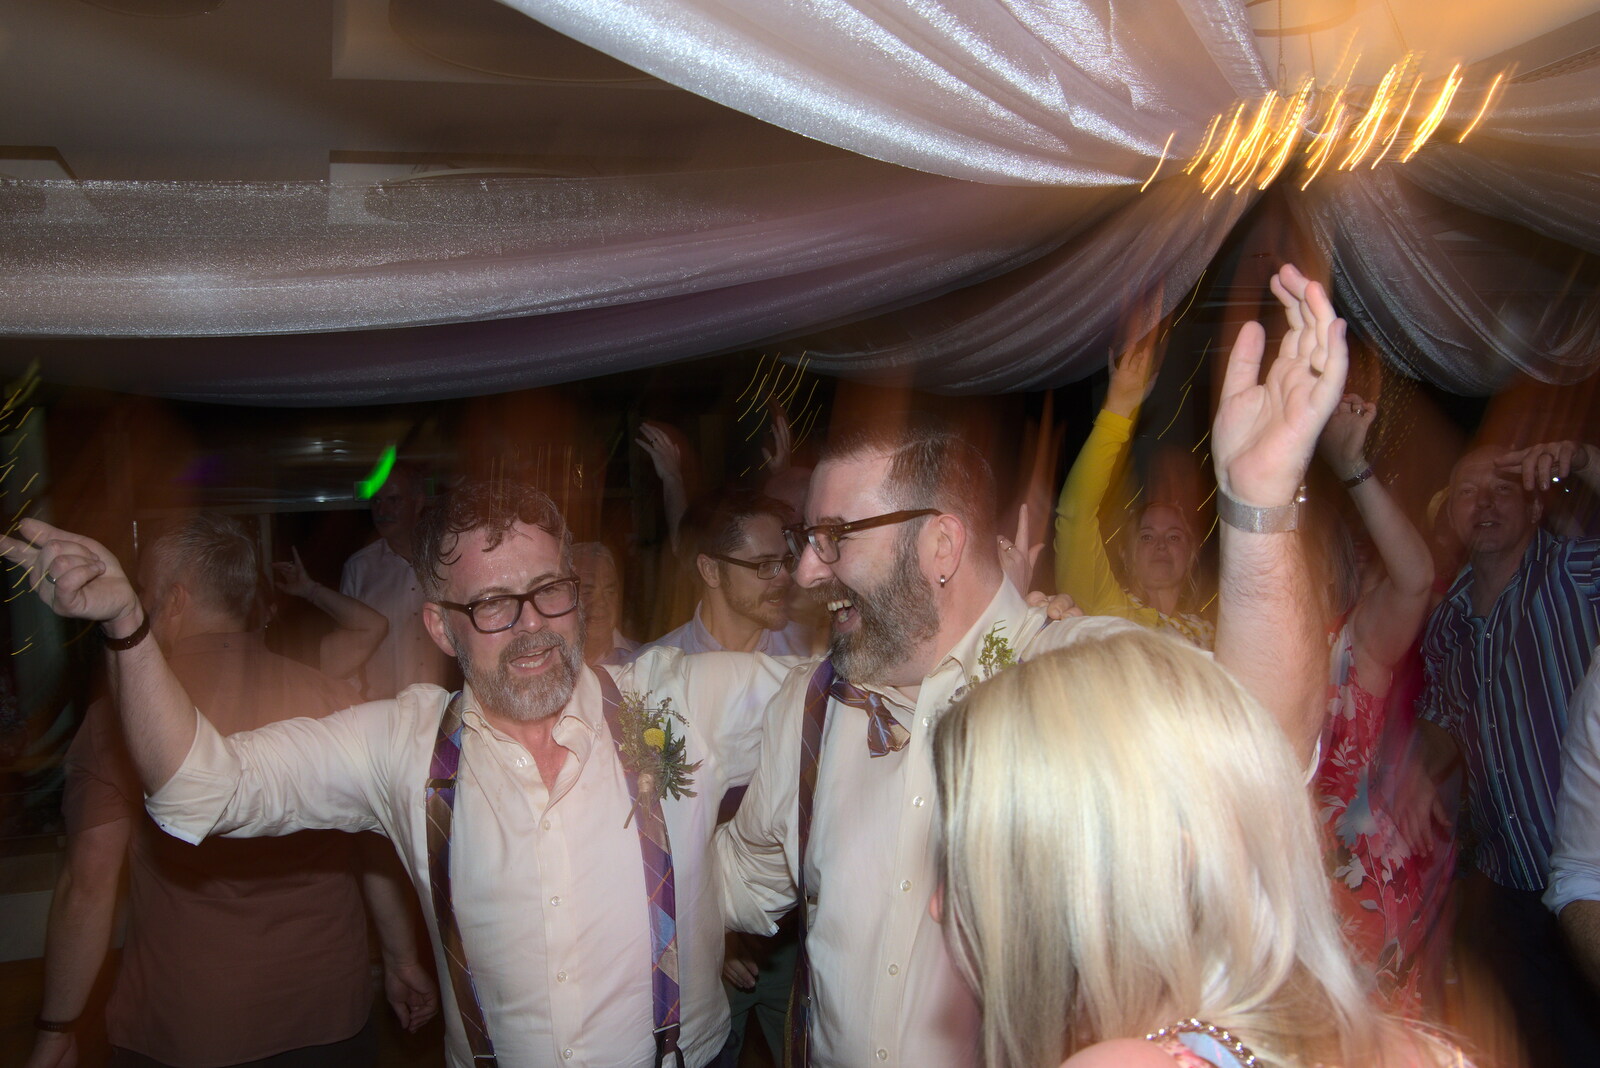 Dancing under an indoor tent from Petay's Wedding Reception, Fanhams Hall, Ware, Hertfordshire - 20th August 2021